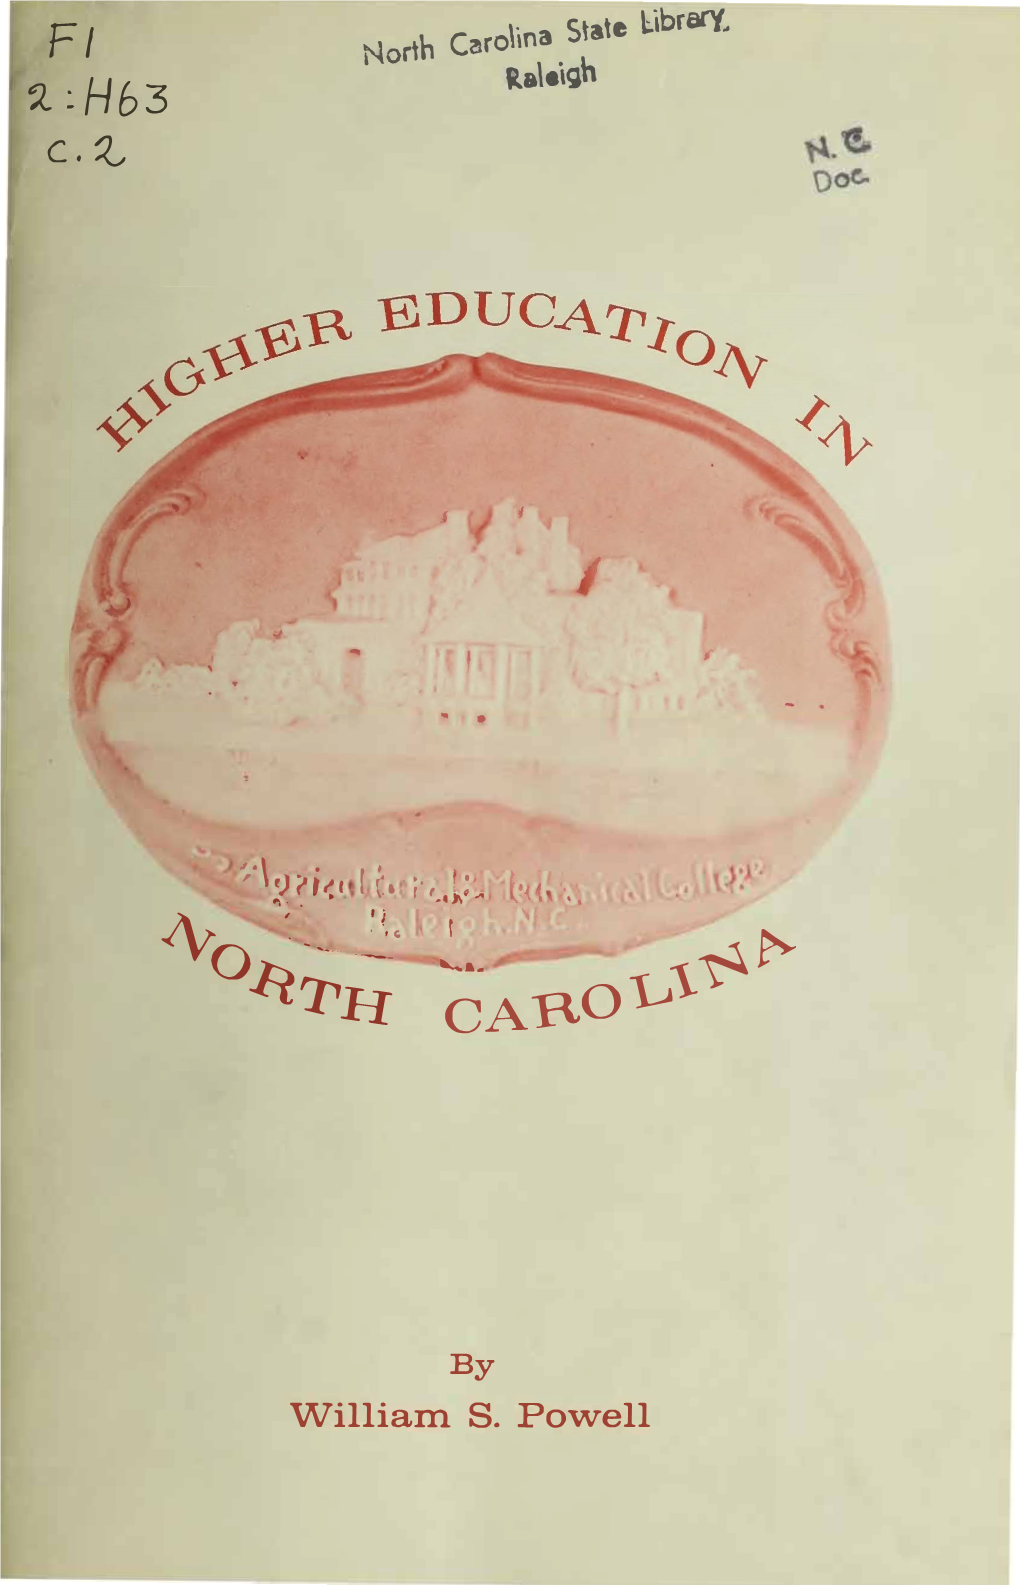 Higher Education in North Carolina / by William S. Powell